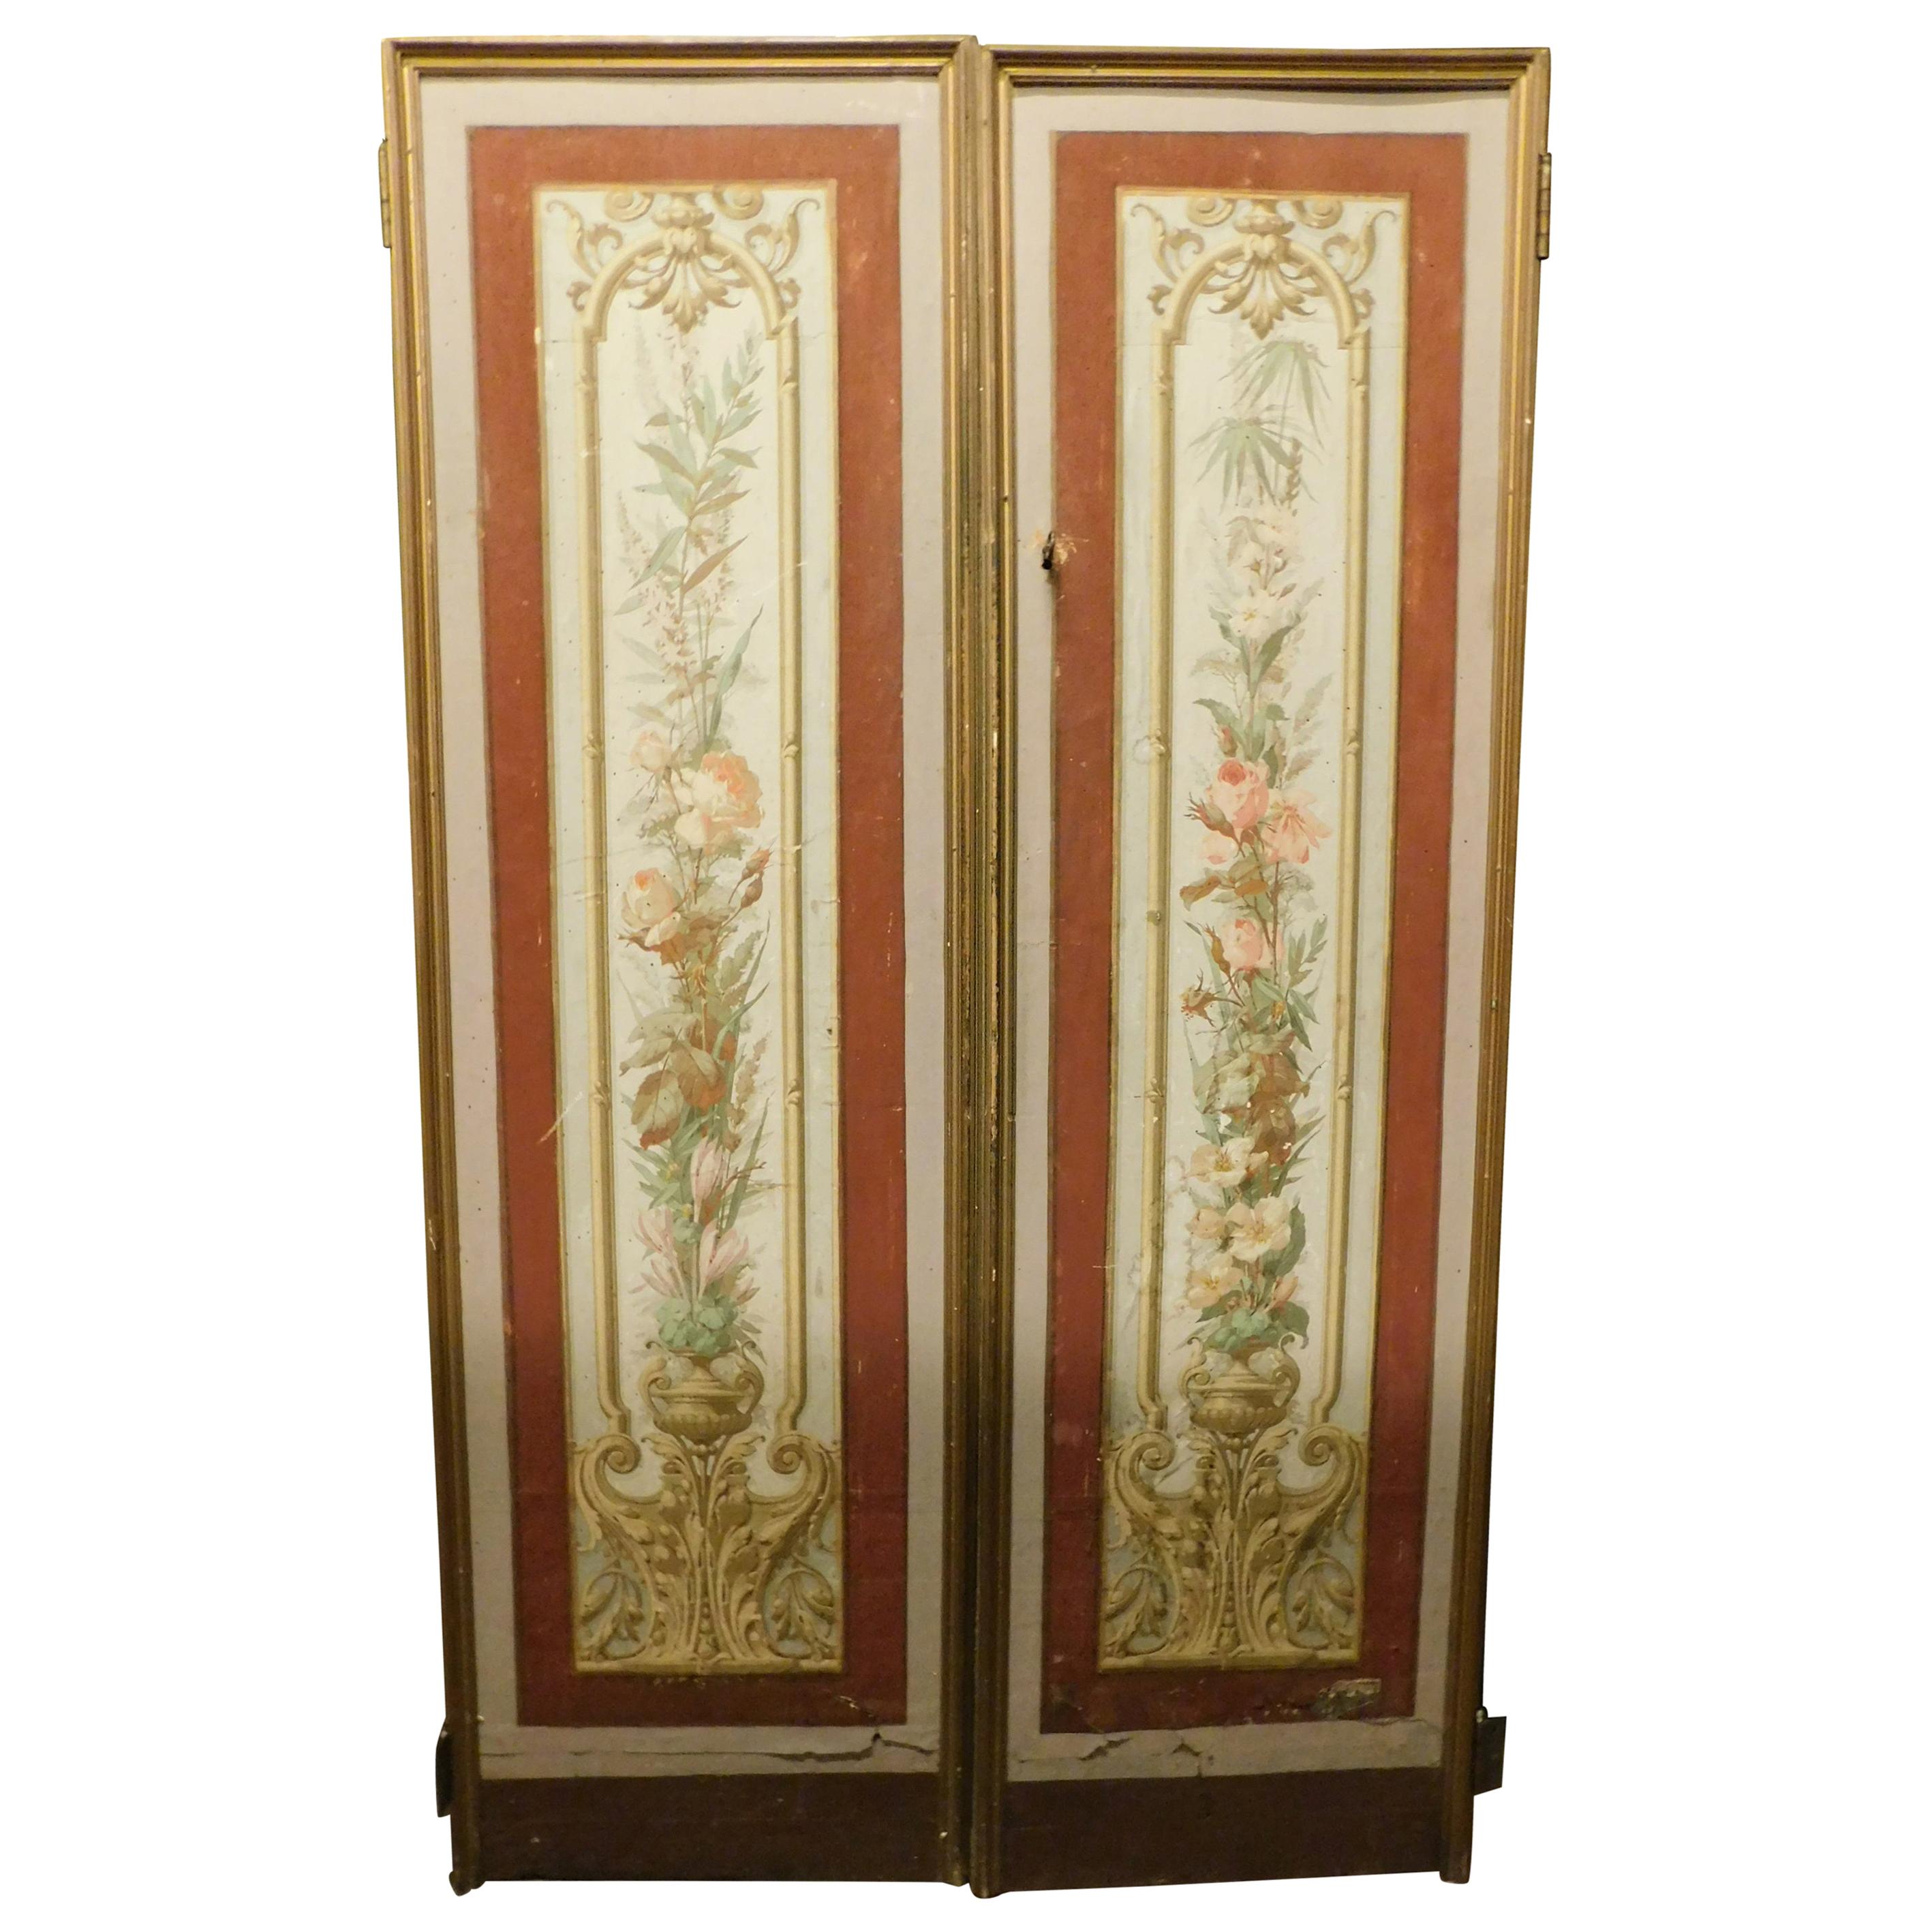 Vintage Pair of Lacquered and Painted Doors, Art Nouveau, Liberty, Early 1900s For Sale